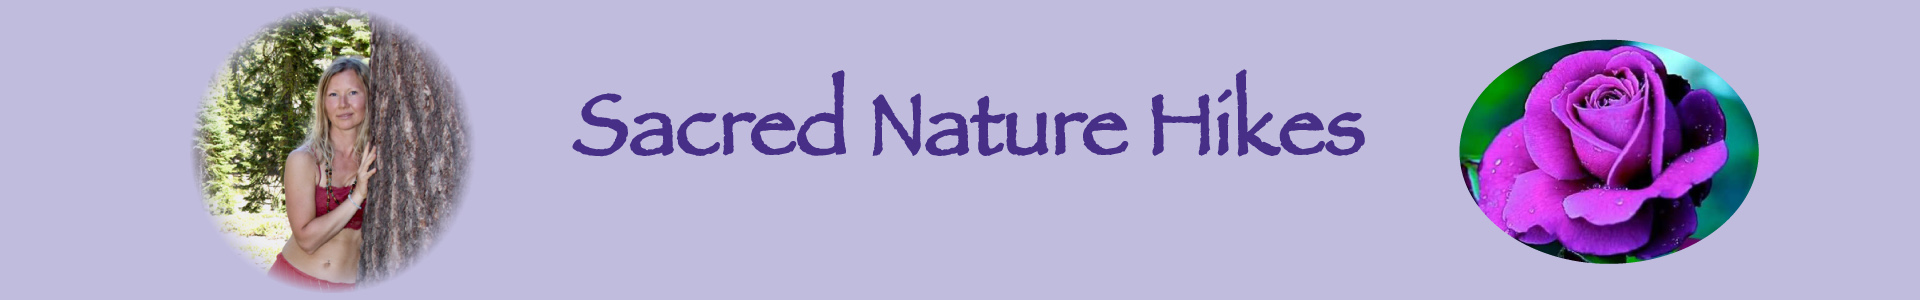 Violet Flame Healing & Guidance - Guided Sacred Nature Hikes